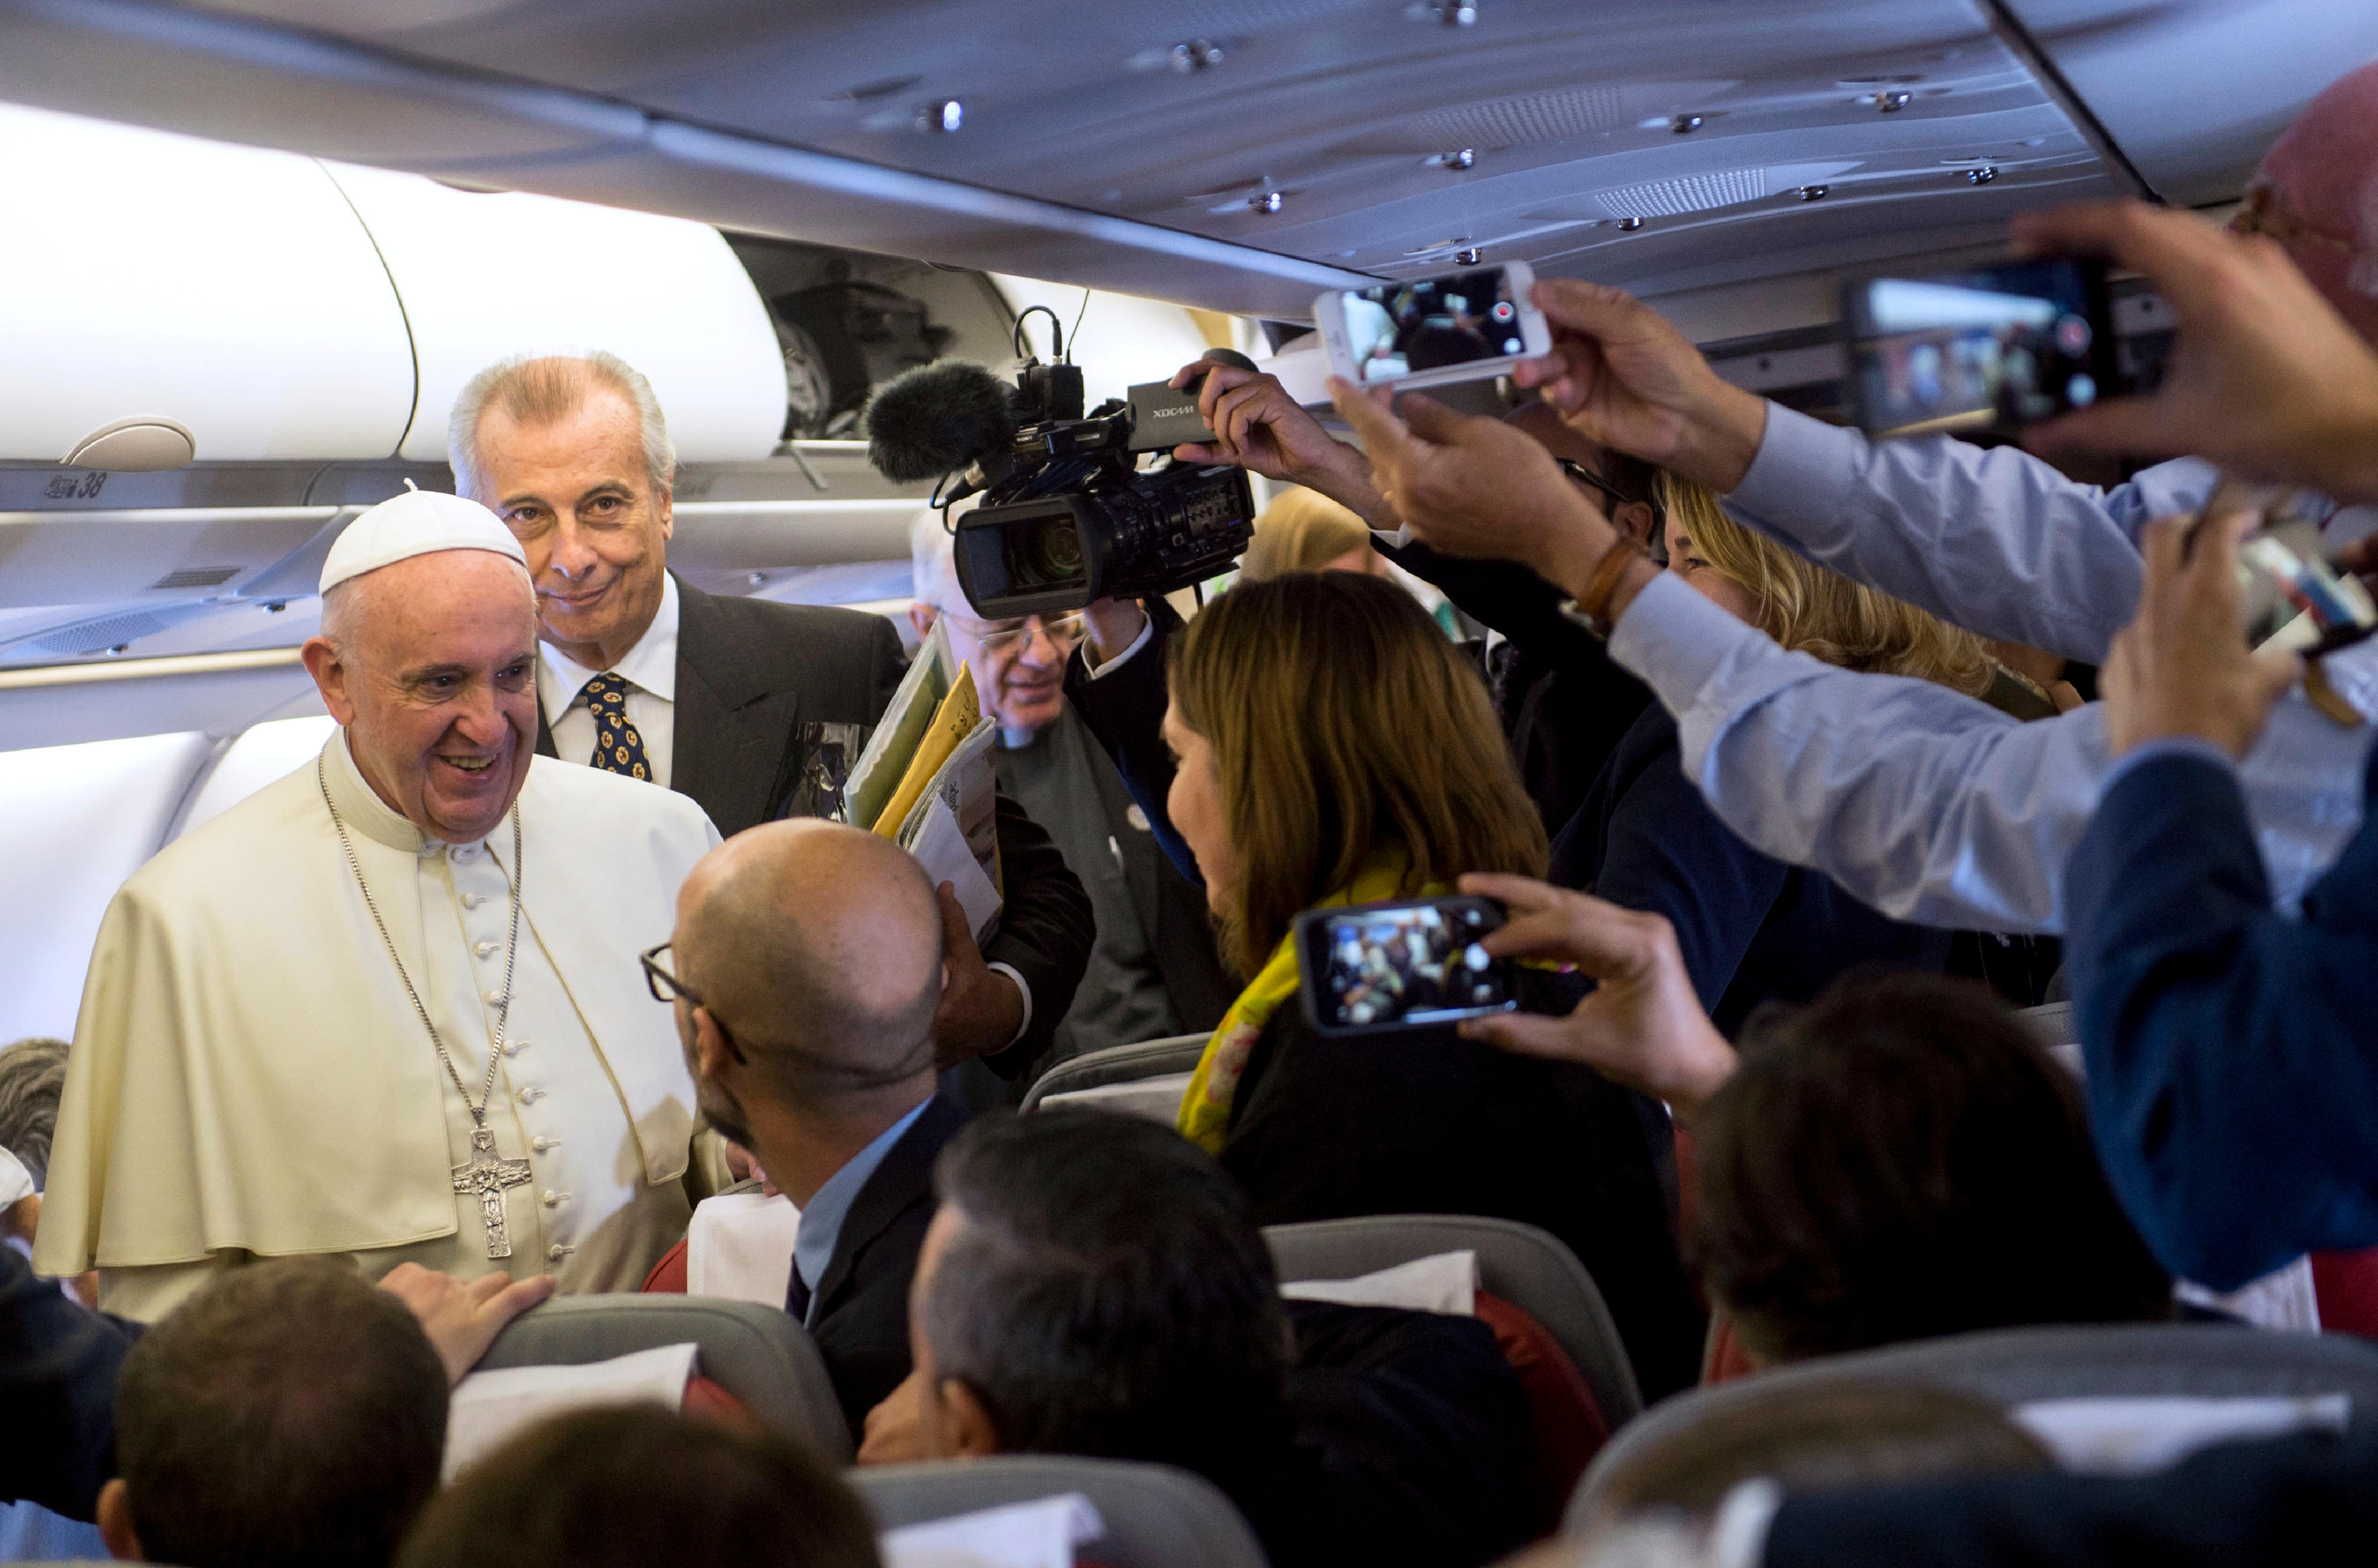 Pope Francis meets with journalists on the papal plane during his flight to Cuba